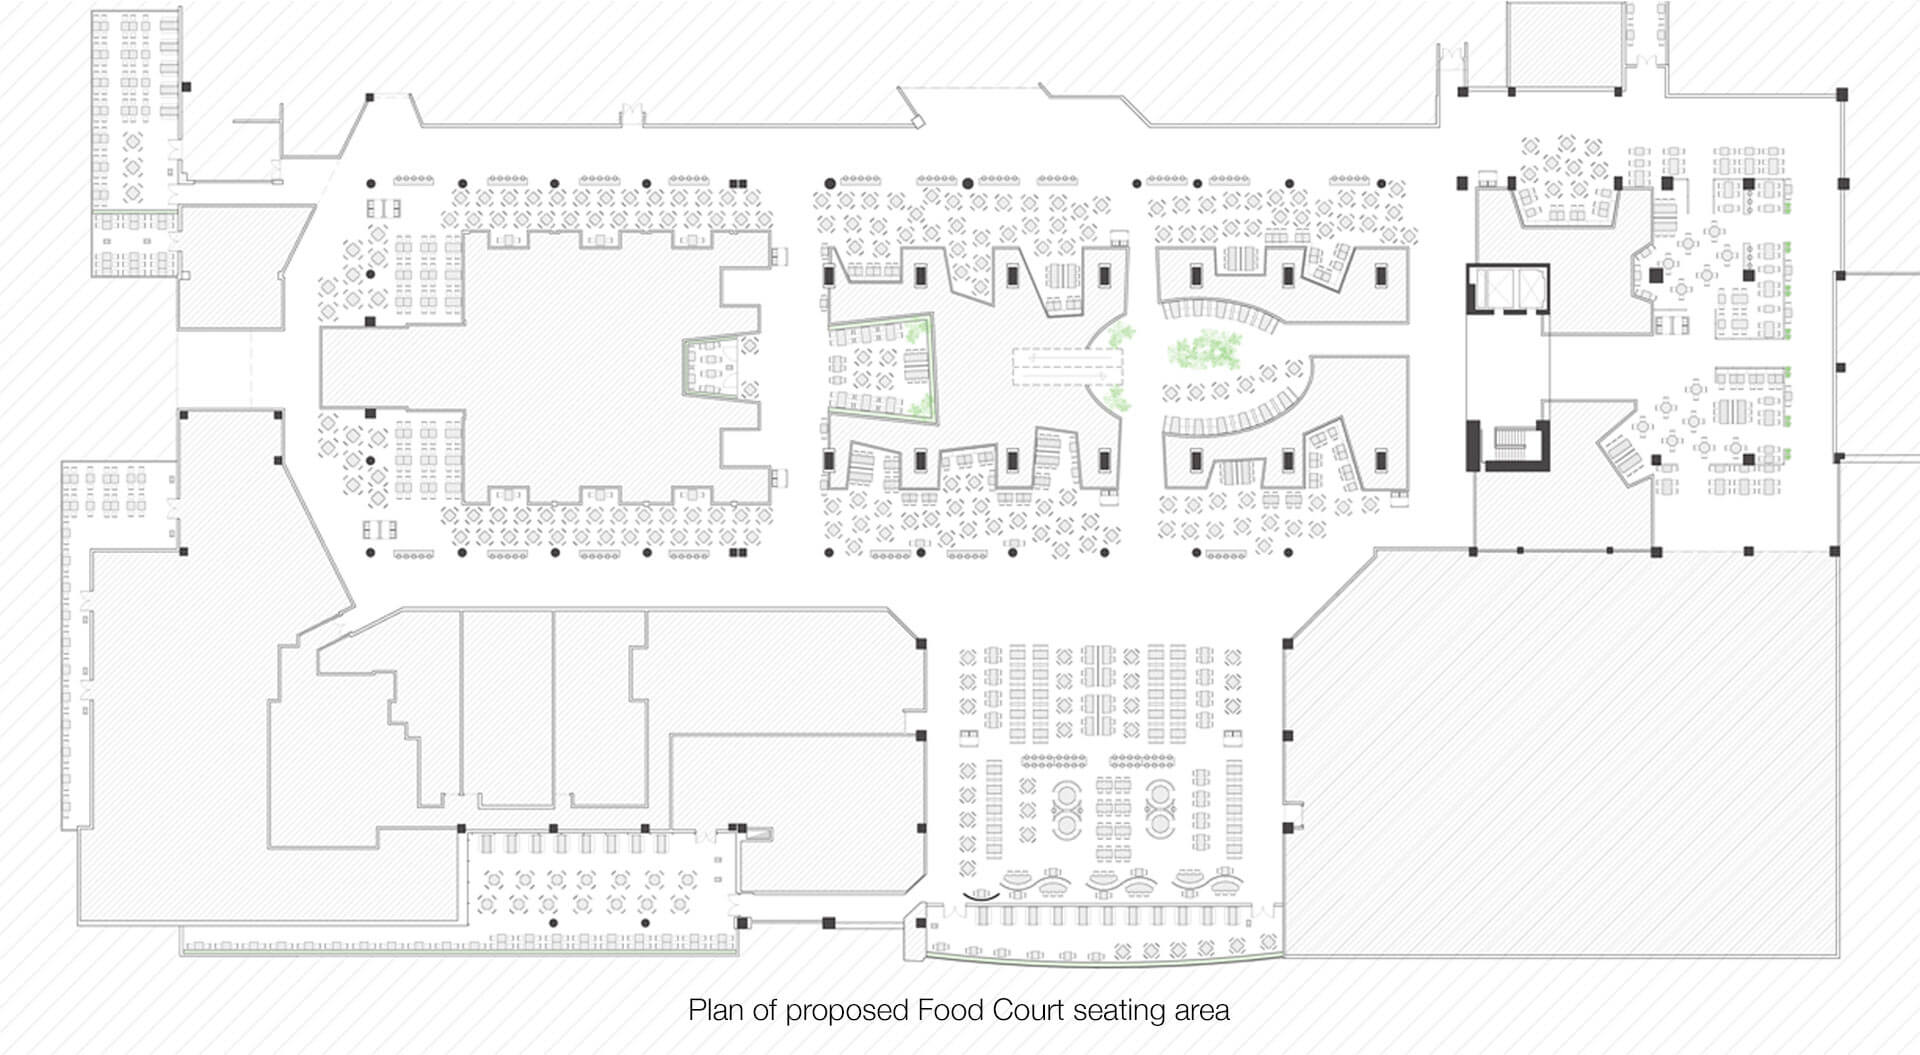 Forum Istanbul Turkey shopping mall proposed food court planning design